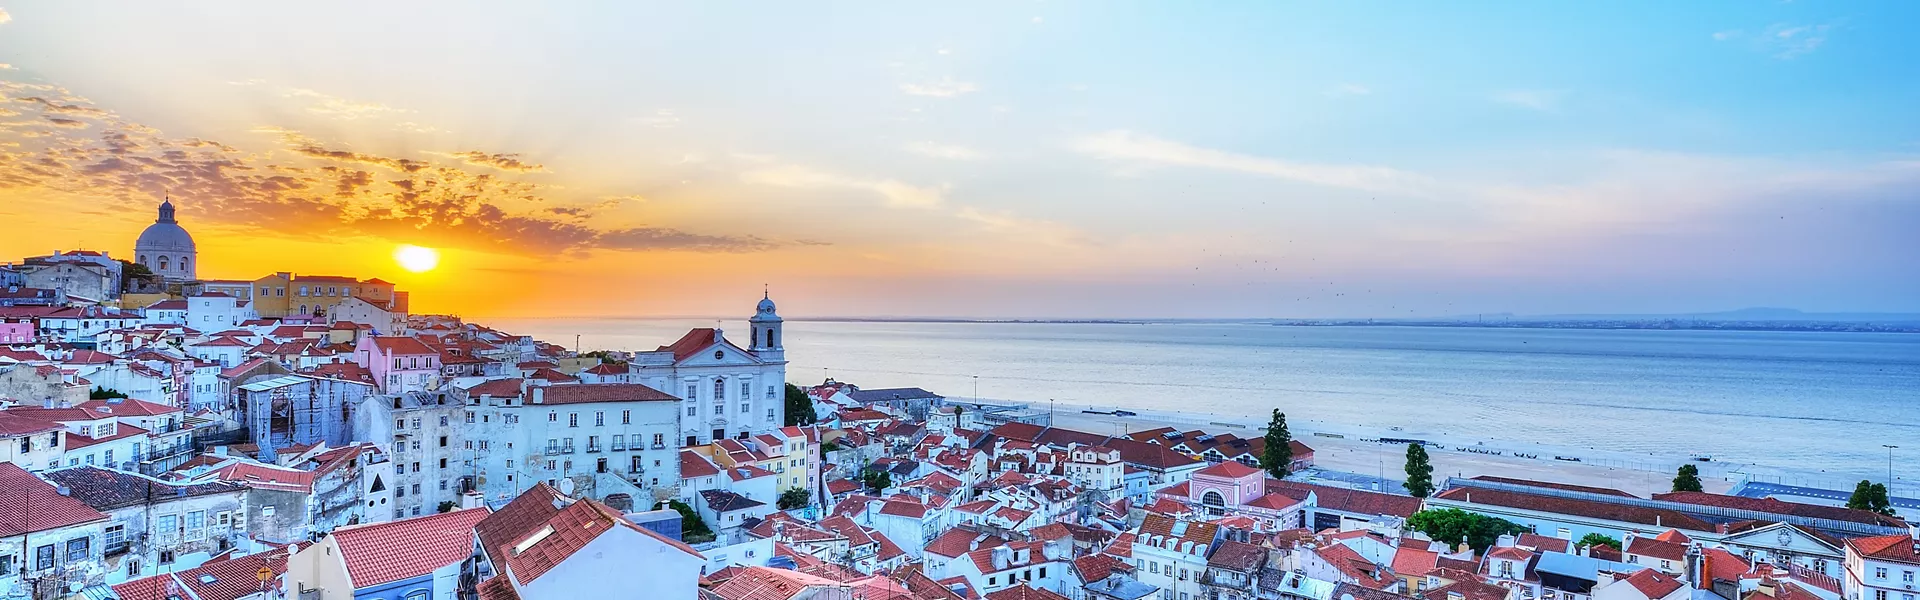 Portugal Guided Tours And Travel Guide